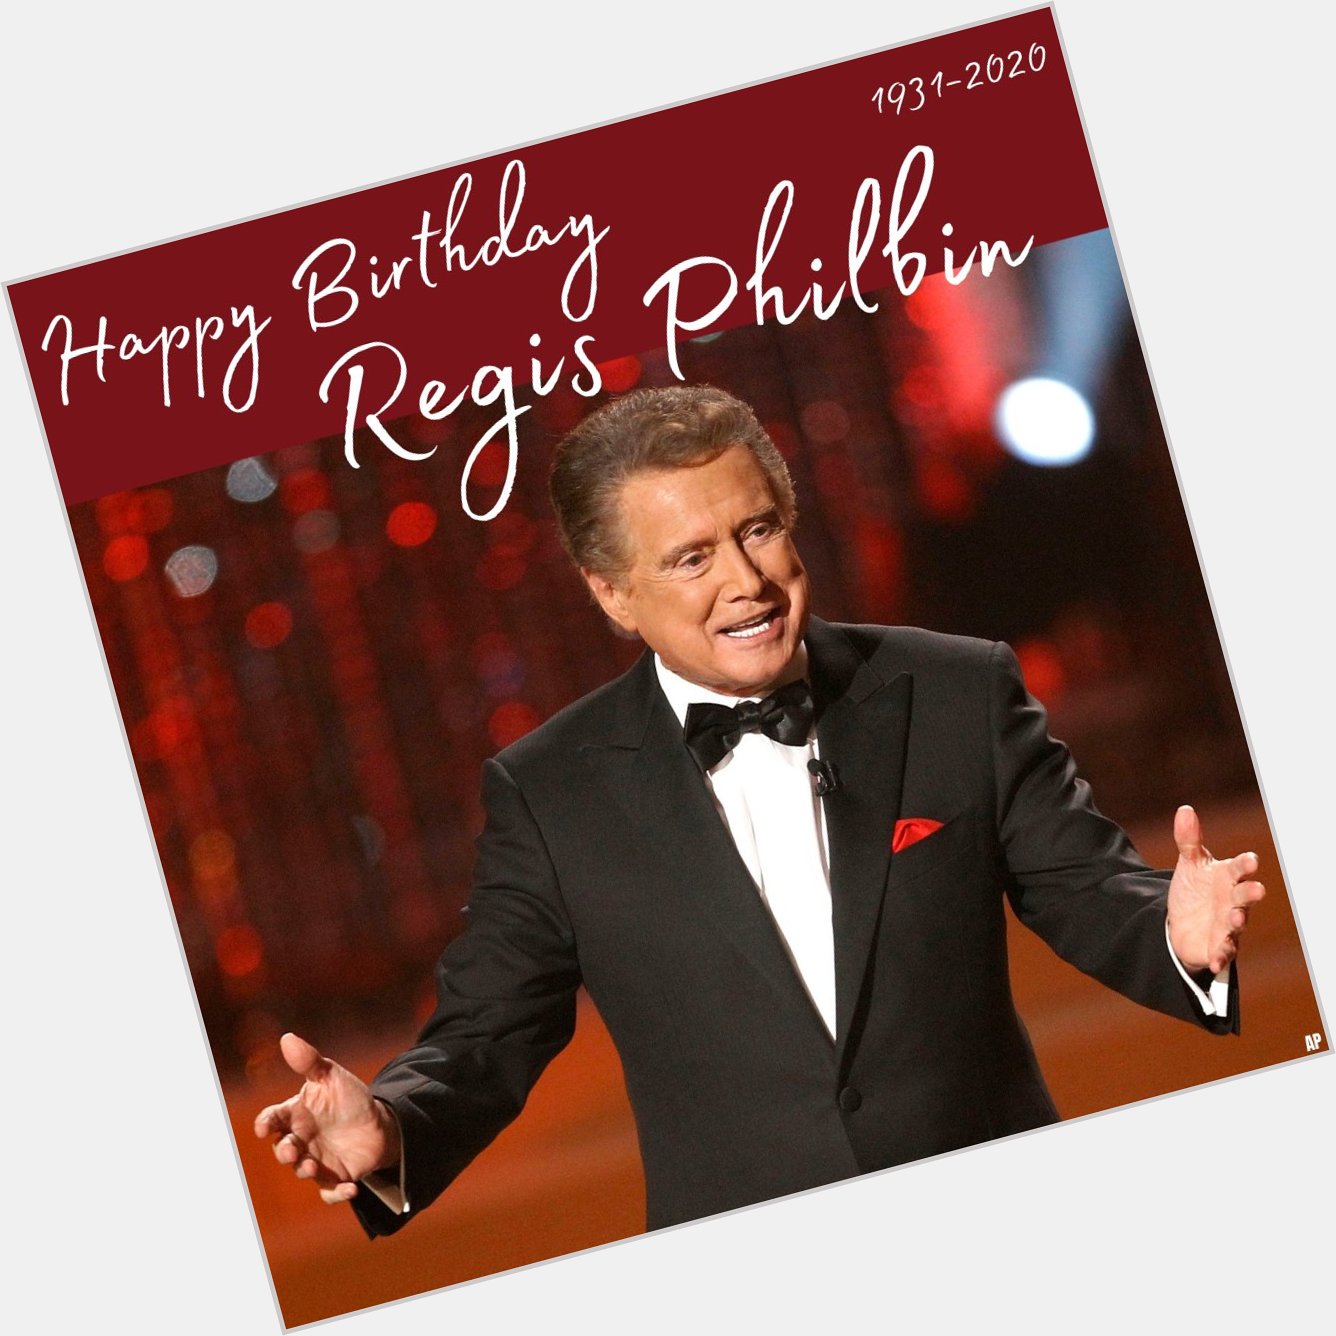 Happy Birthday to Regis Philbin, who died last month at 88 years old. 